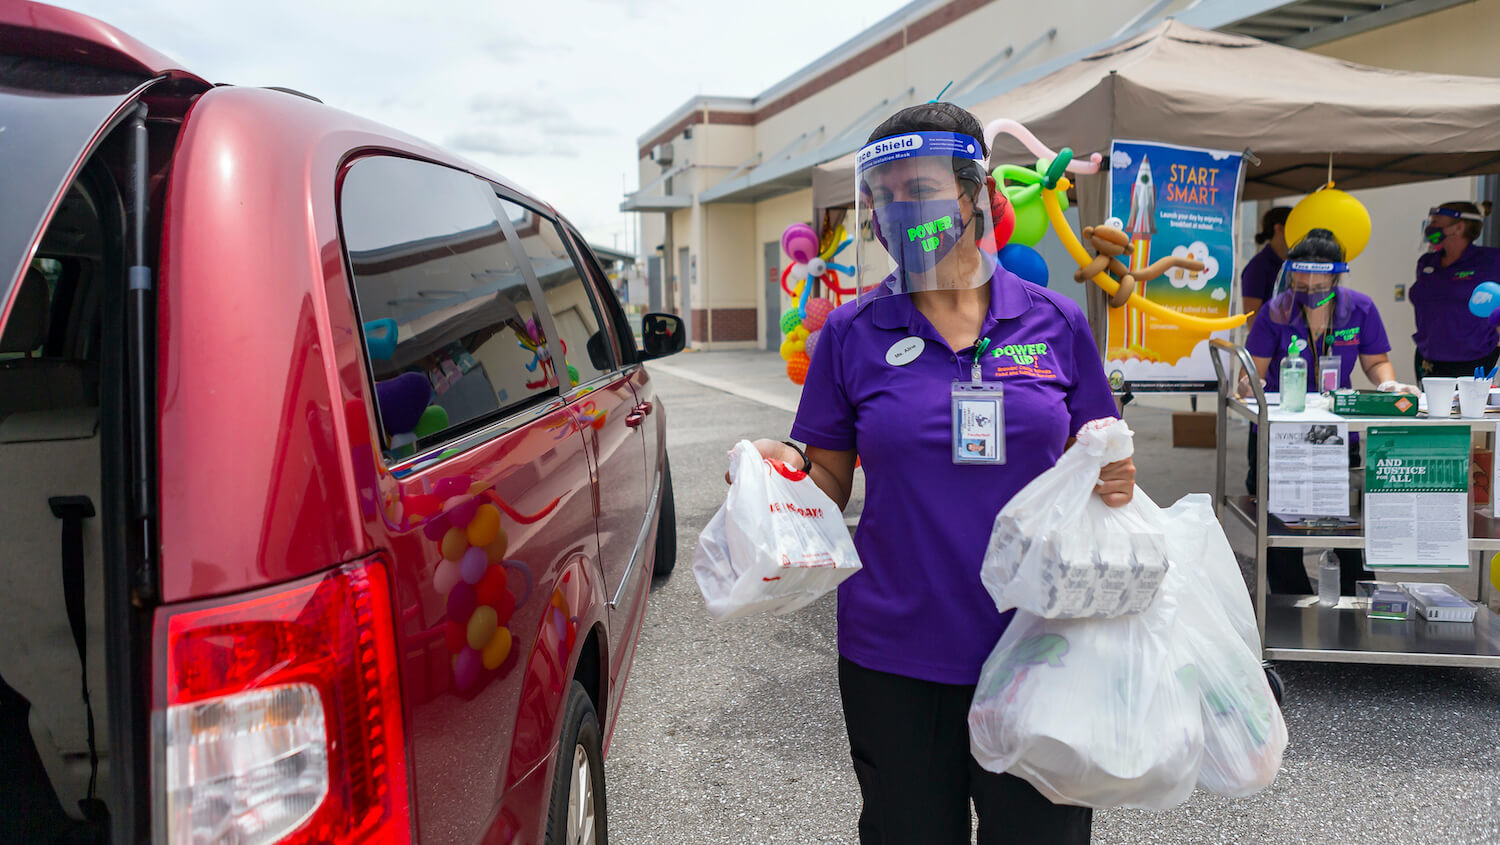 Aline Martins, center, distributes free and reduced lunch during the first day of classes in Broward County at Discovery Elementary School in Sunrise, Fla., on Wednesday, Aug. 19, 2020.